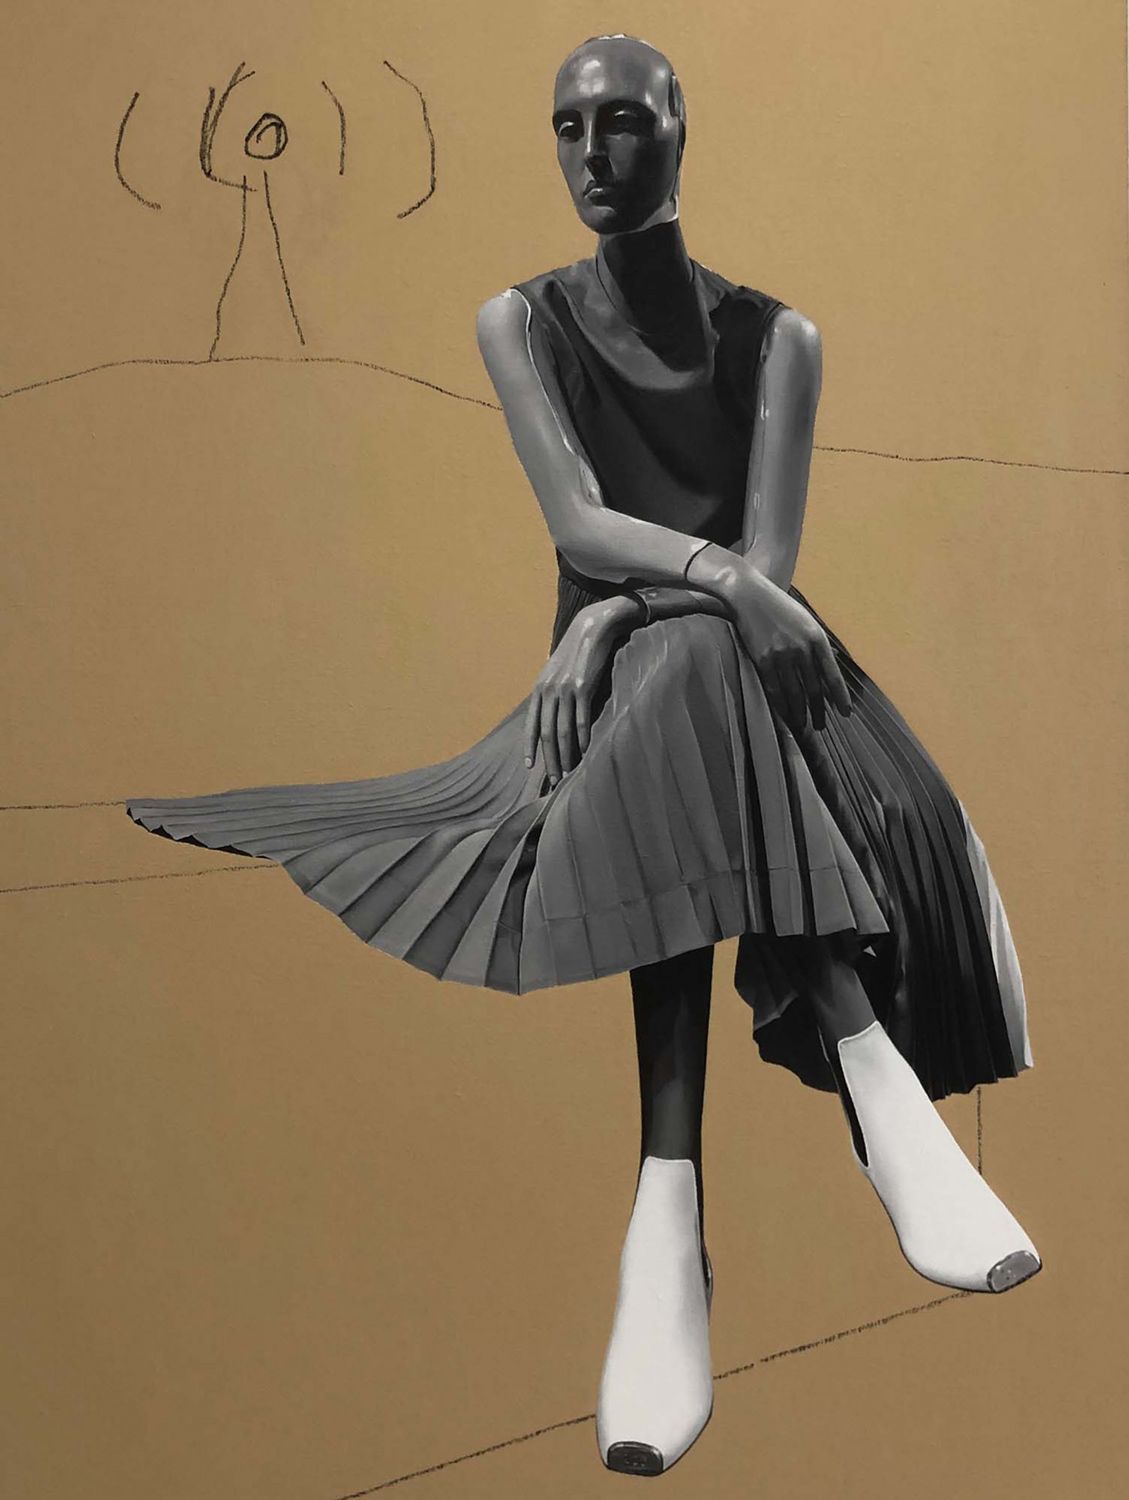 Sleek mannequin in a black dress seated with white ankle boots against a beige backdrop featuring a simple drawn figure.